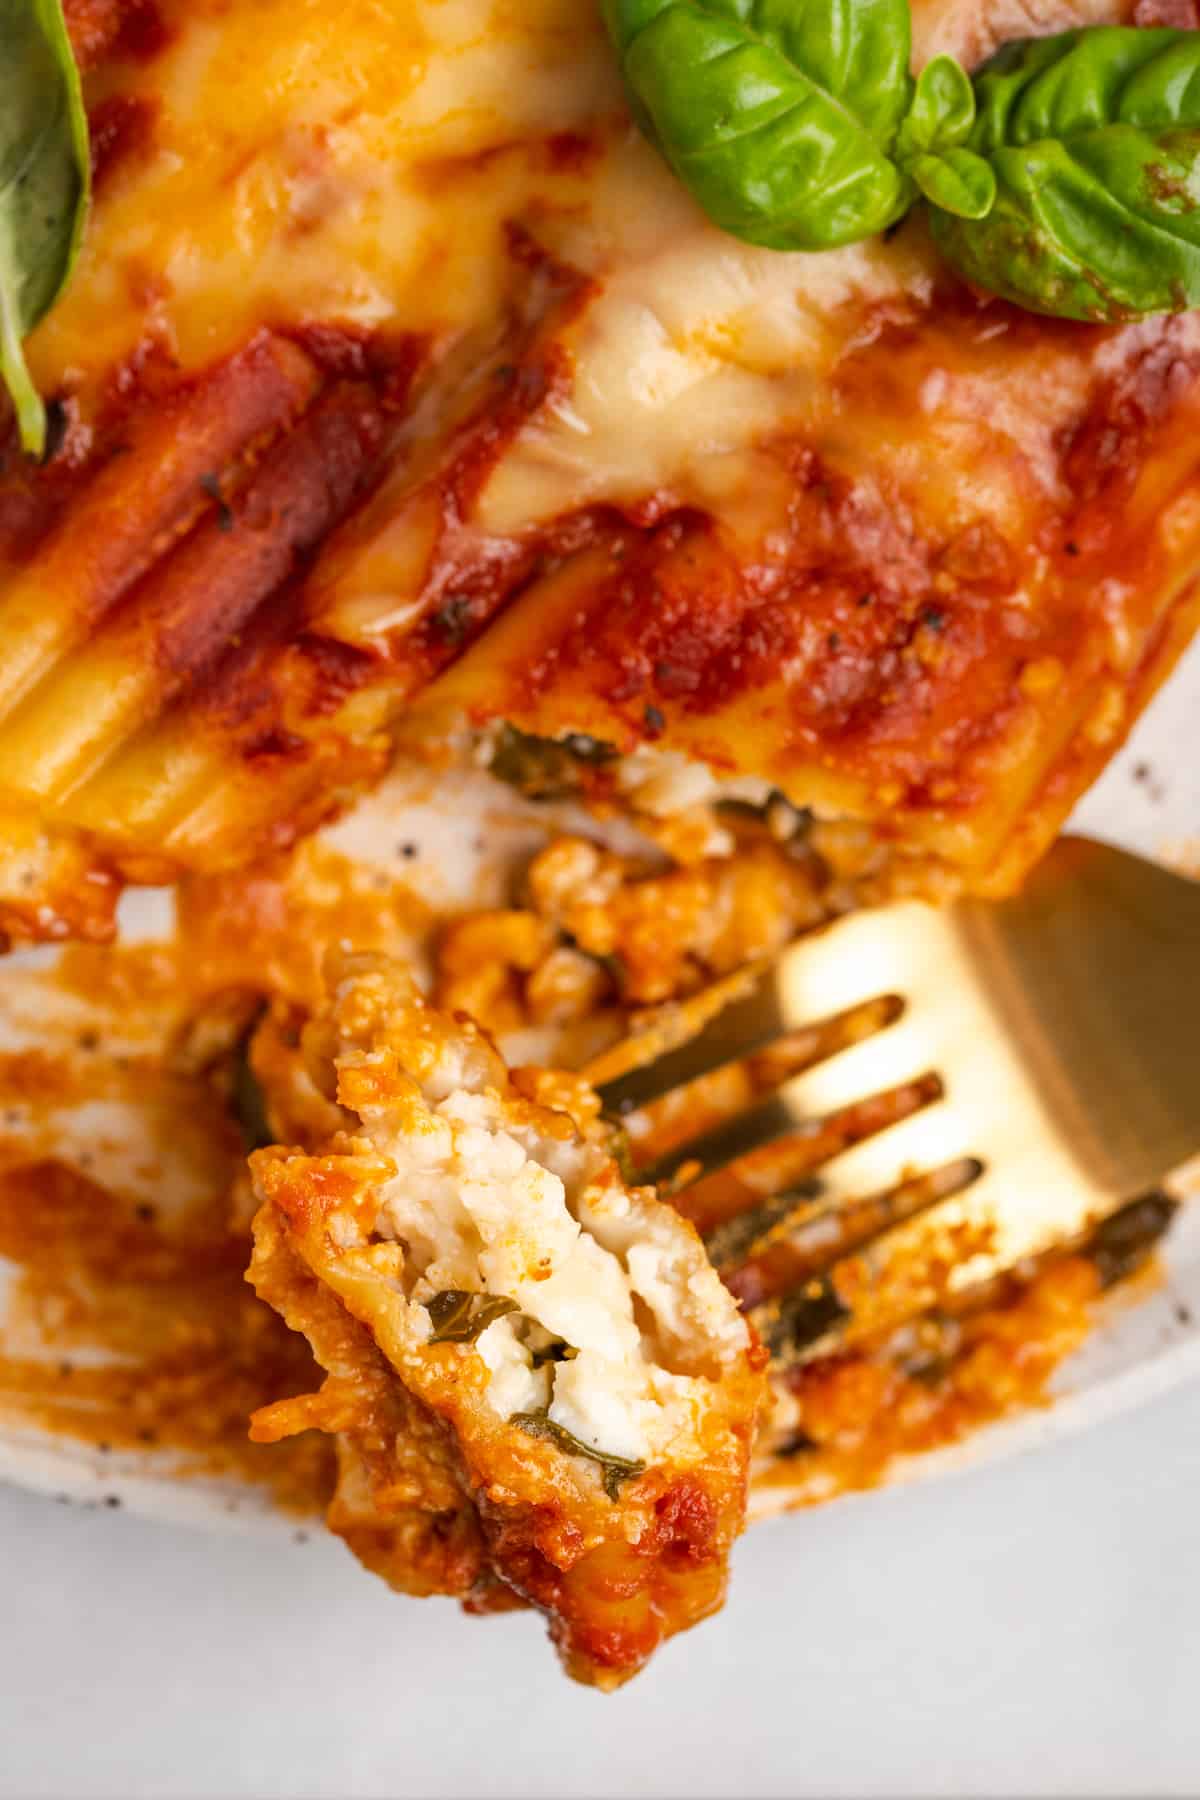 Forkful of vegan manicotti with spinach and ricotta filling